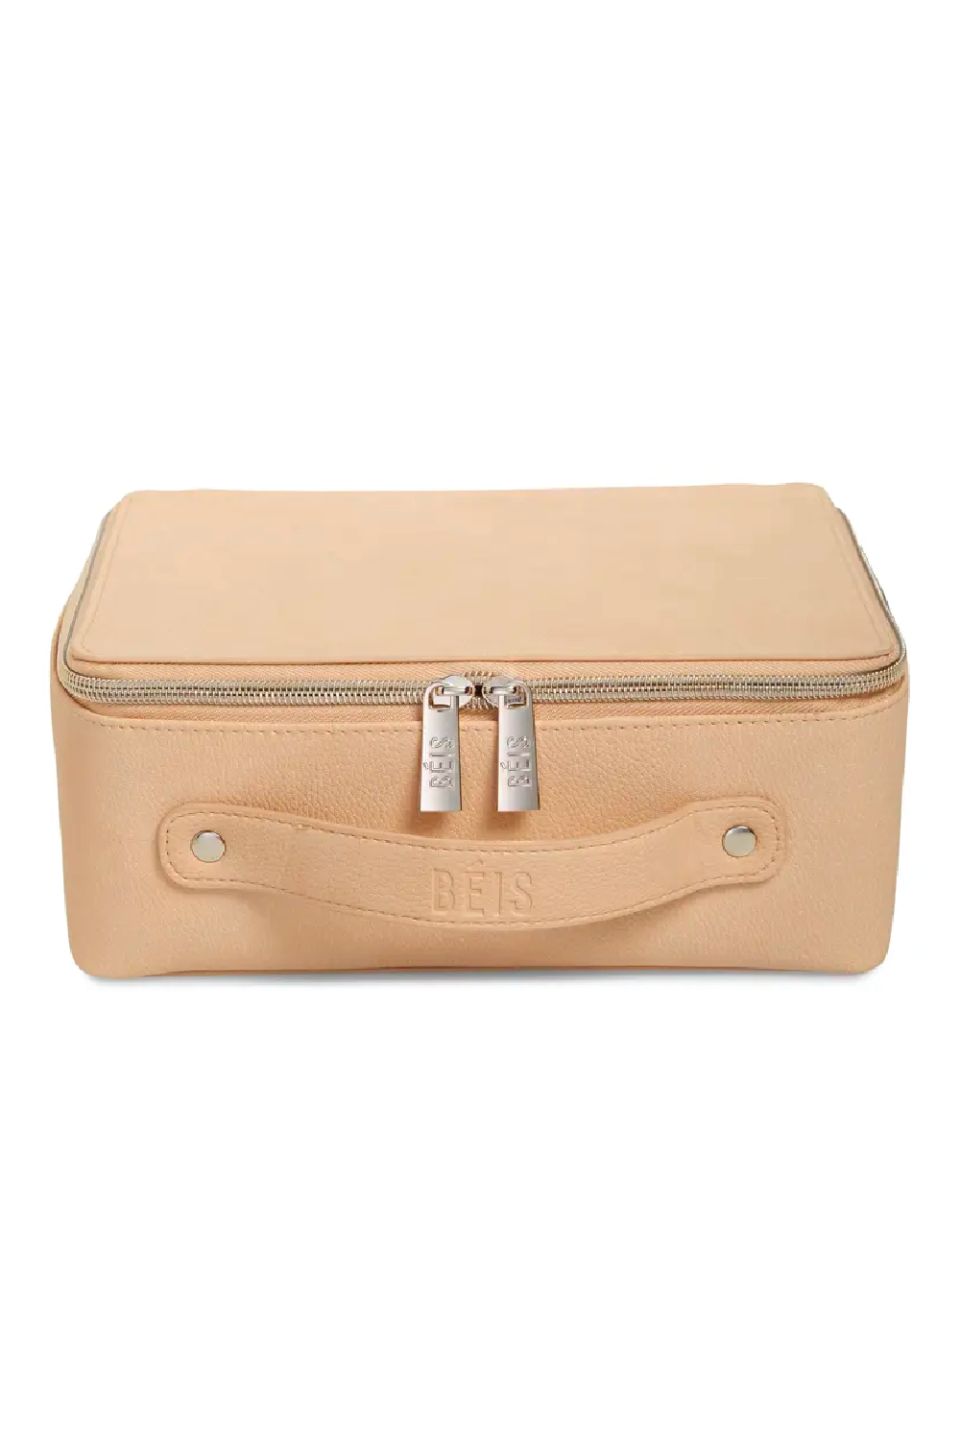 Beis Cosmetic Case